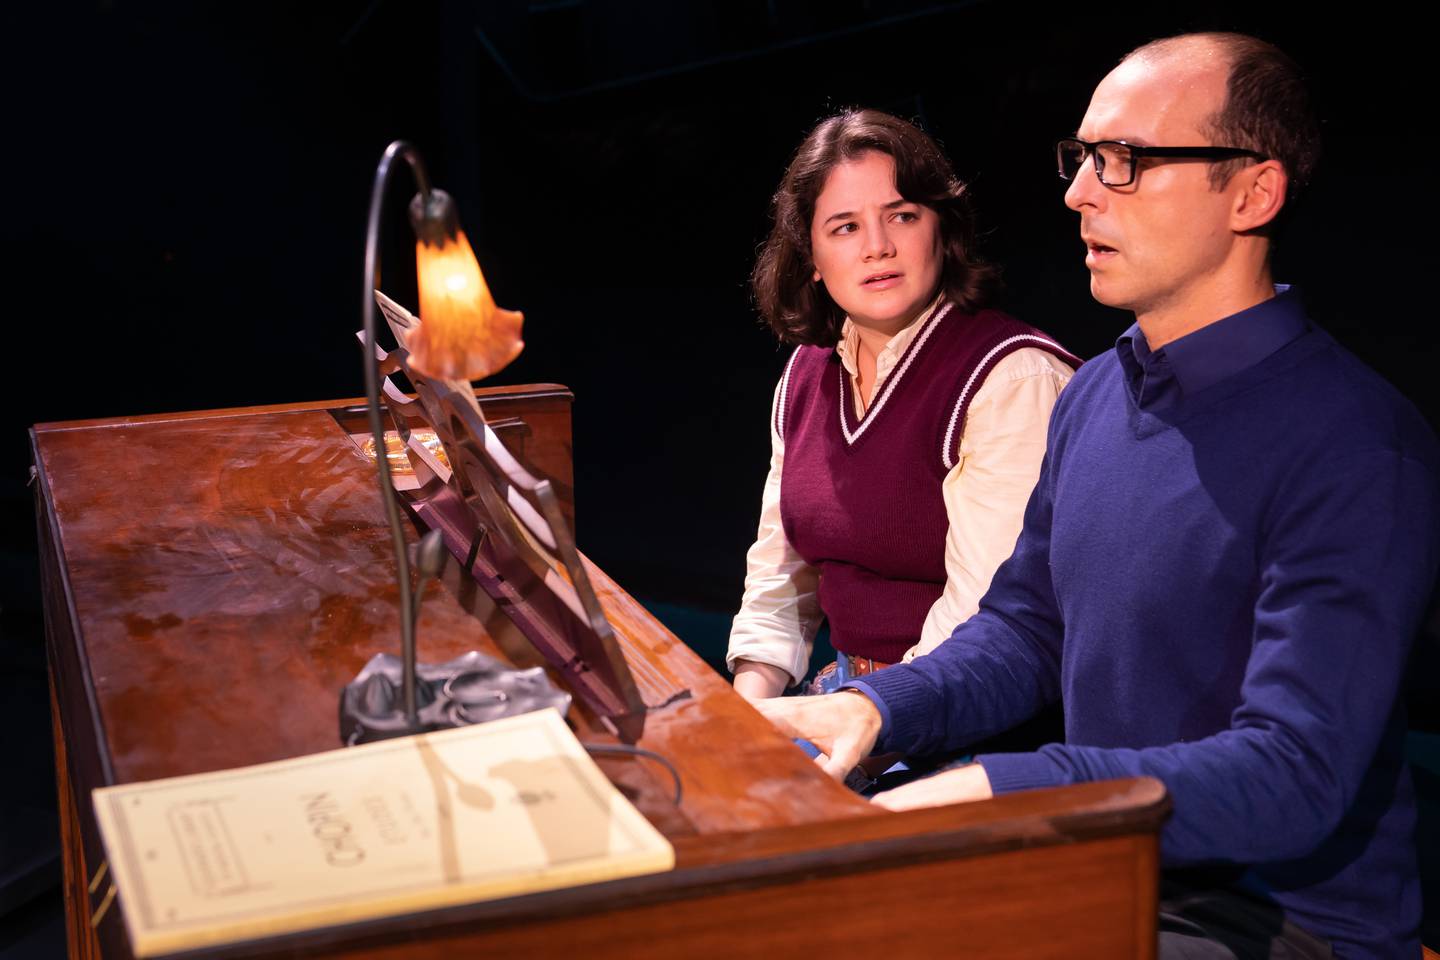 Elizabeth Stenholt (left) plays Medium Alison and Stephen Schellhardt plays Alison’s father, Bruce, in Paramount’s BOLD Series production of Fun Home, running through September 18, 2022 at Paramount’s Copley Theatre, 8 E. Galena Blvd. in downtown Aurora. Tickets: paramountaurora.com or (630) 896-6666. Note: Liss rotates in the role of Small Alison with Maya Keane. Credit: Liz Lauren